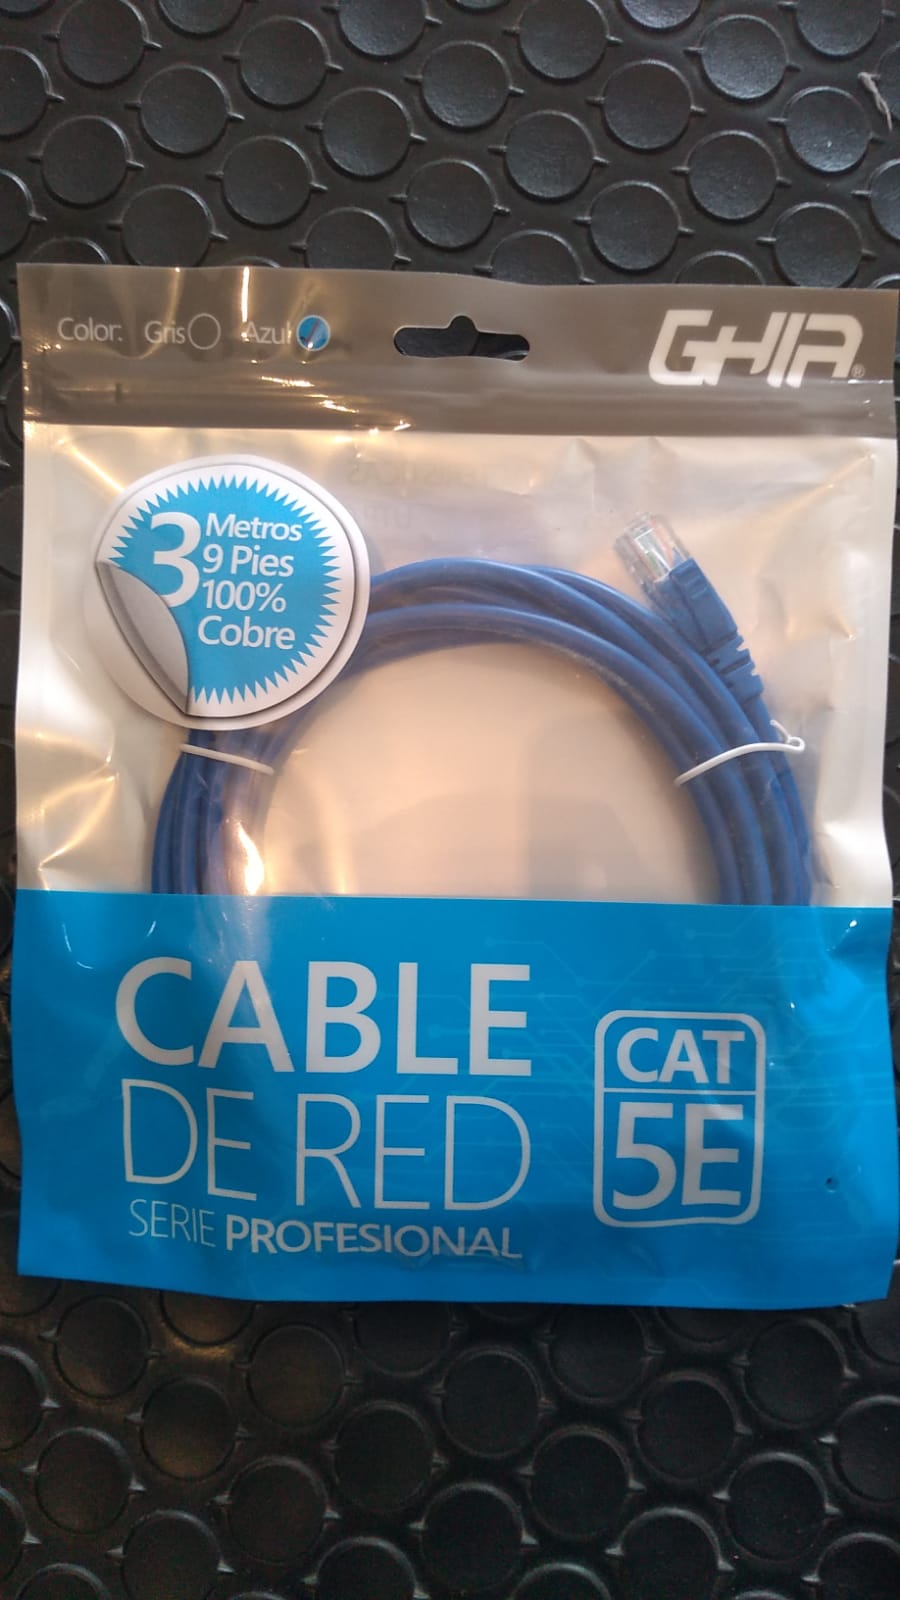 * CABLE DE RED SERIE PROFESIONAL MARCA GHIA *